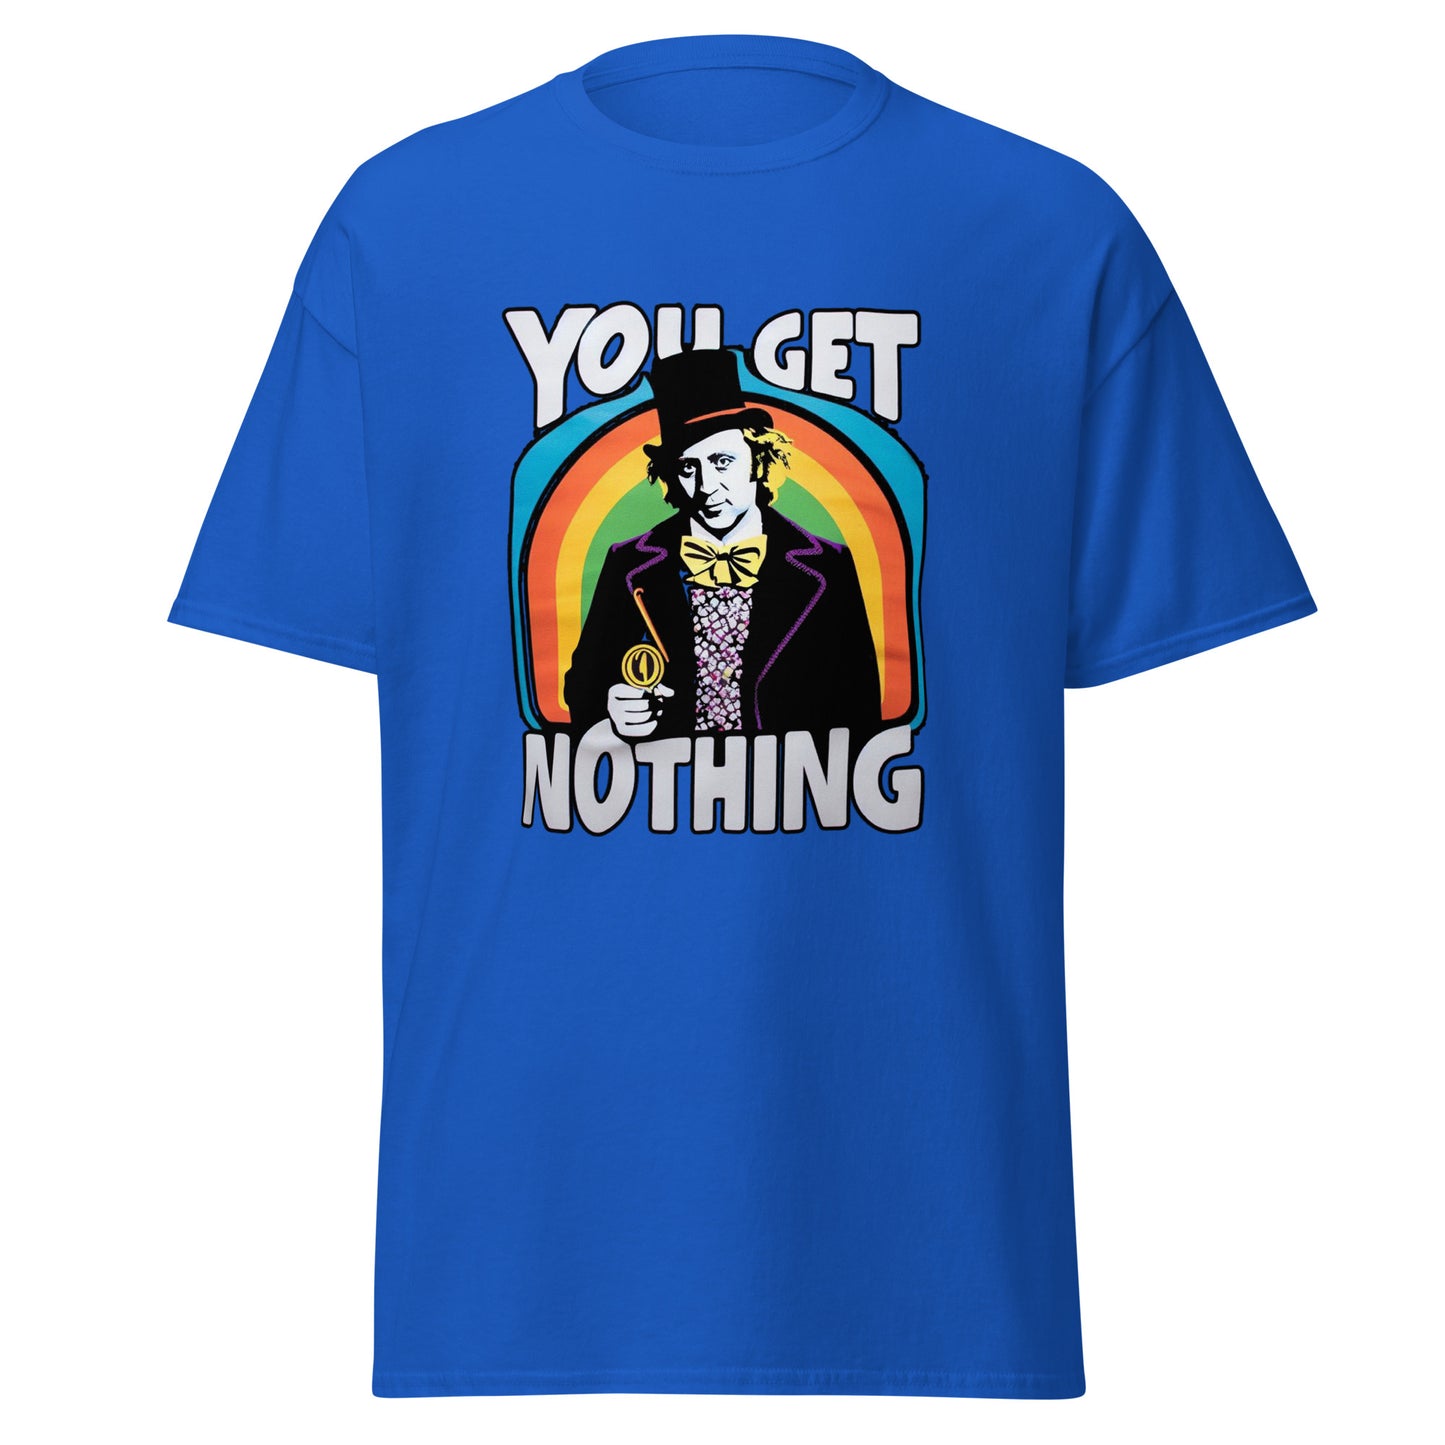 Willy Wonka 'You Get Nothing' T-Shirt - A Sweet Slice of Sarcasm